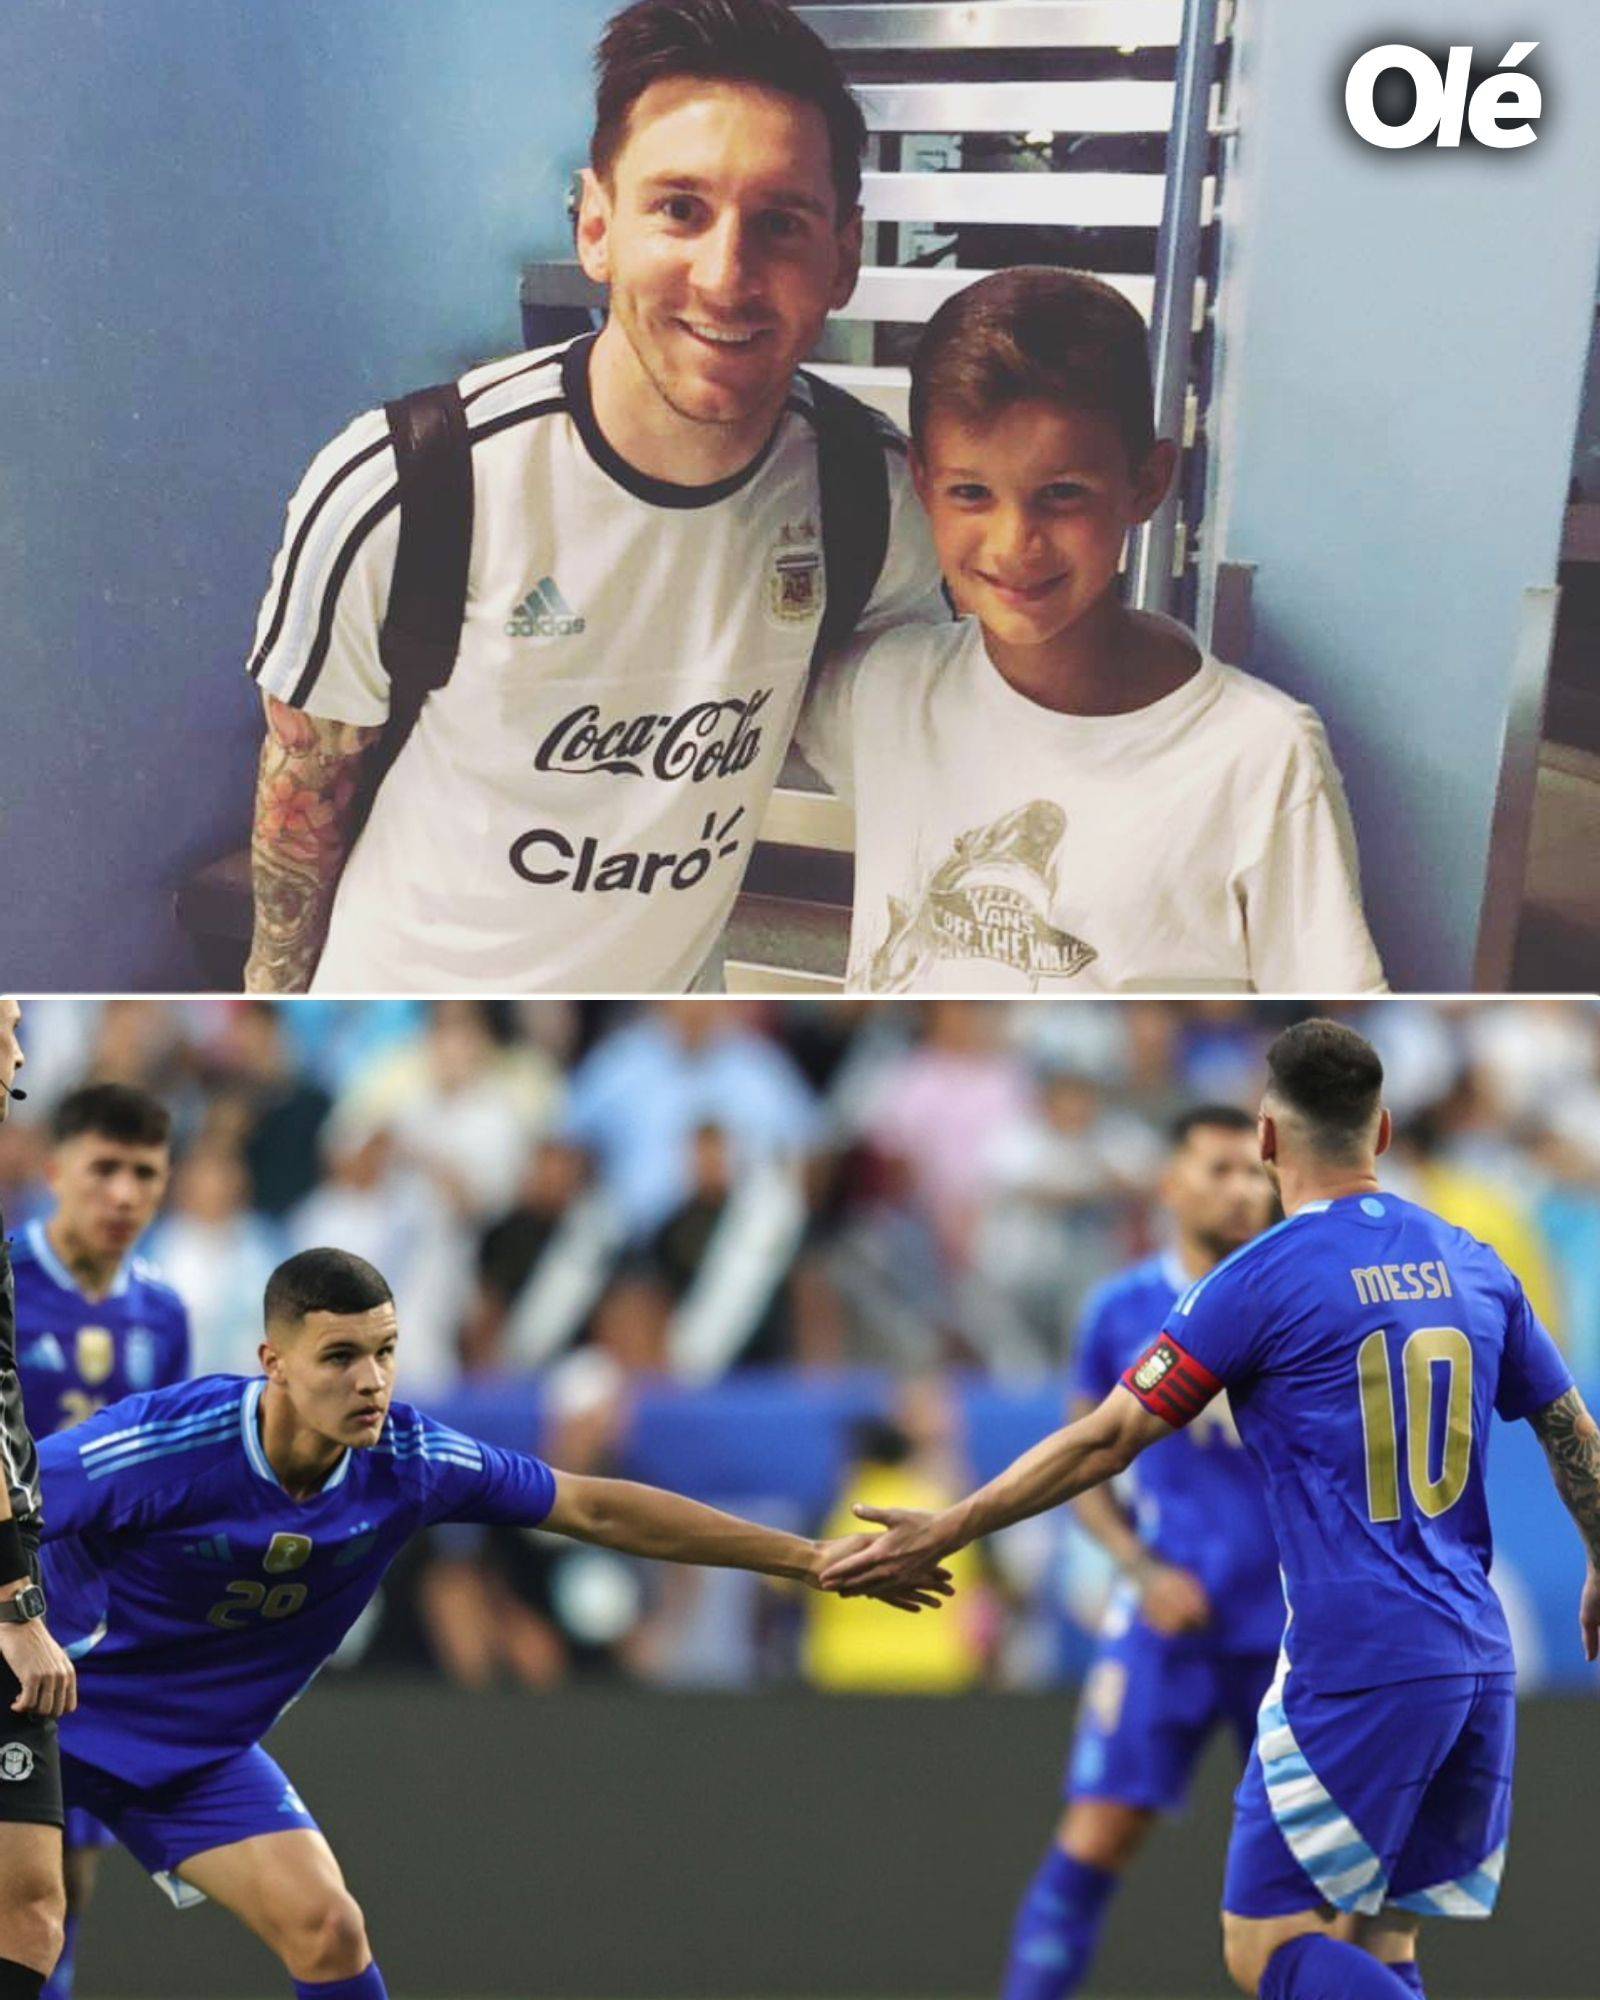 【One Picture Says It All】From Idol to Teammate: 19-Year-Old Argentine Player Caboni Shares the Pitch with Messi